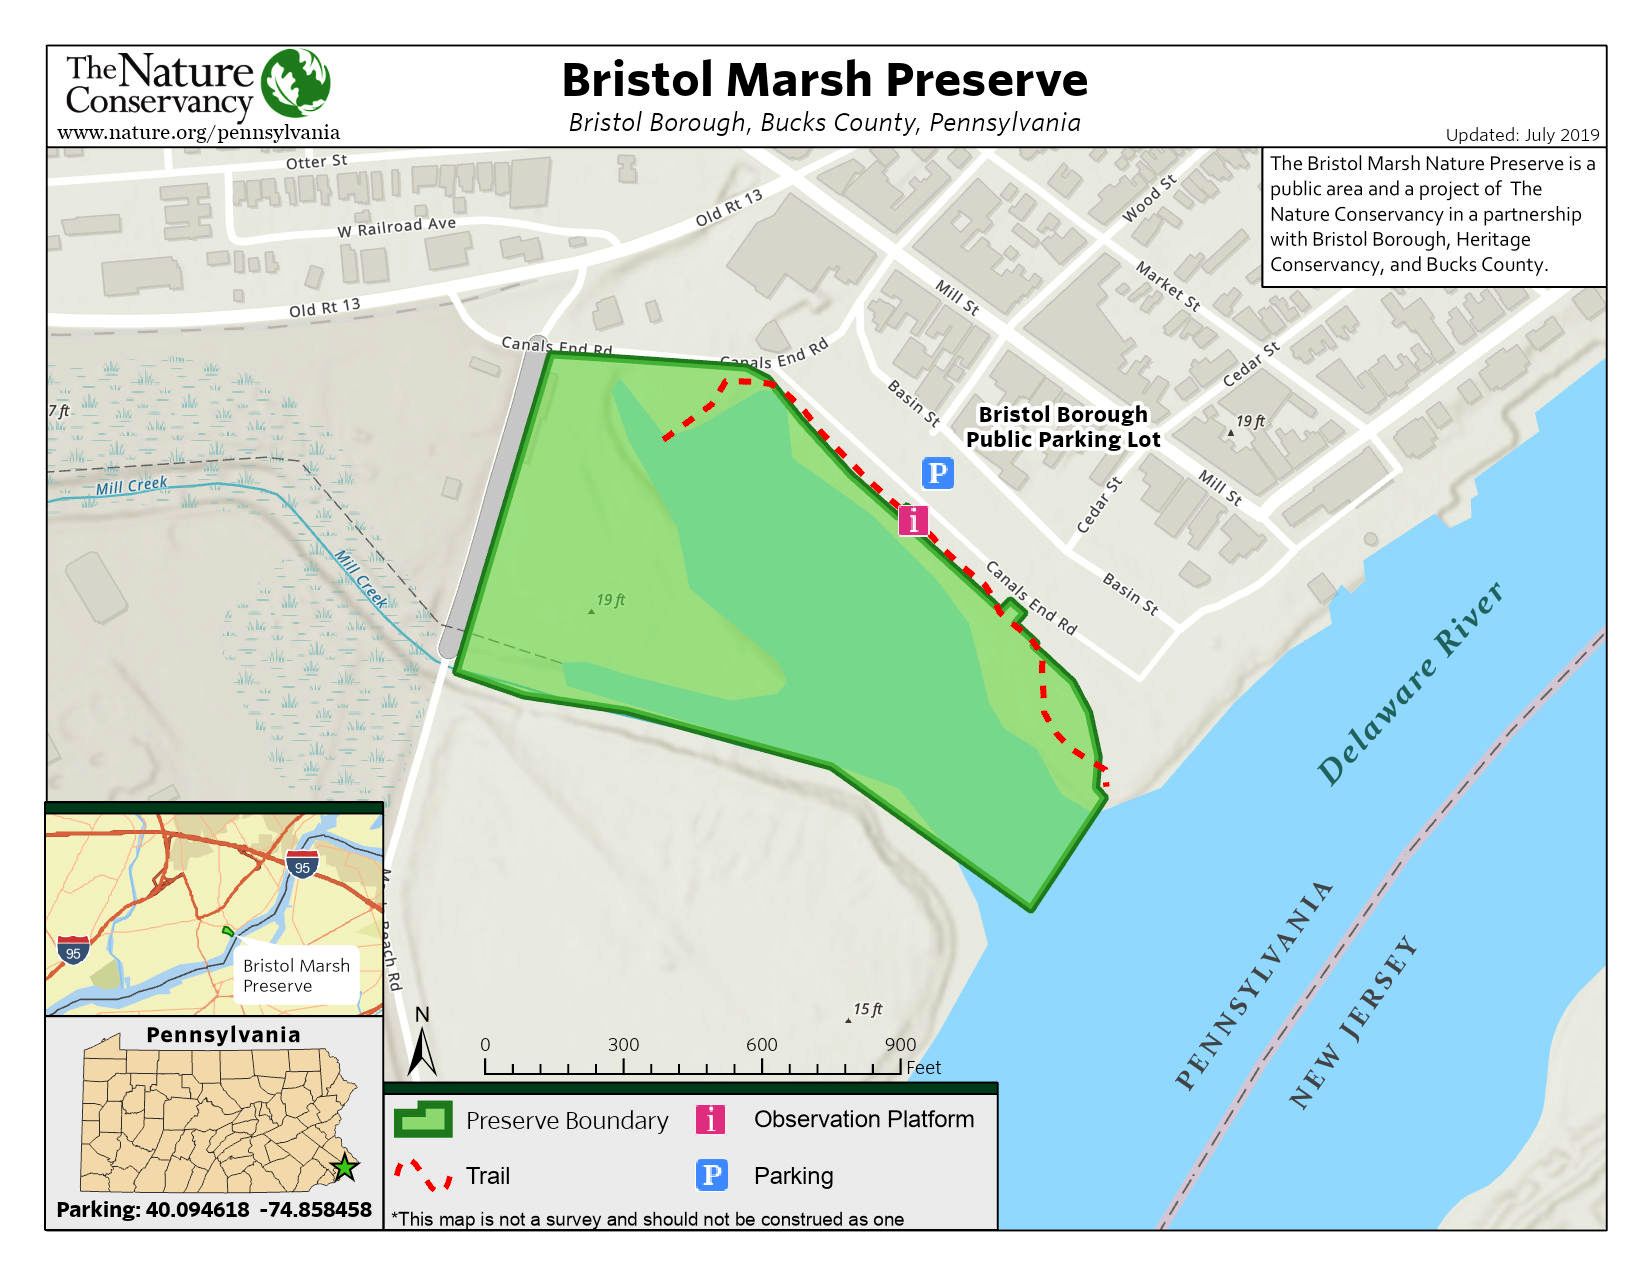 Bristol Marsh Nature Preserve map, with the preserve boundary outlined in green.